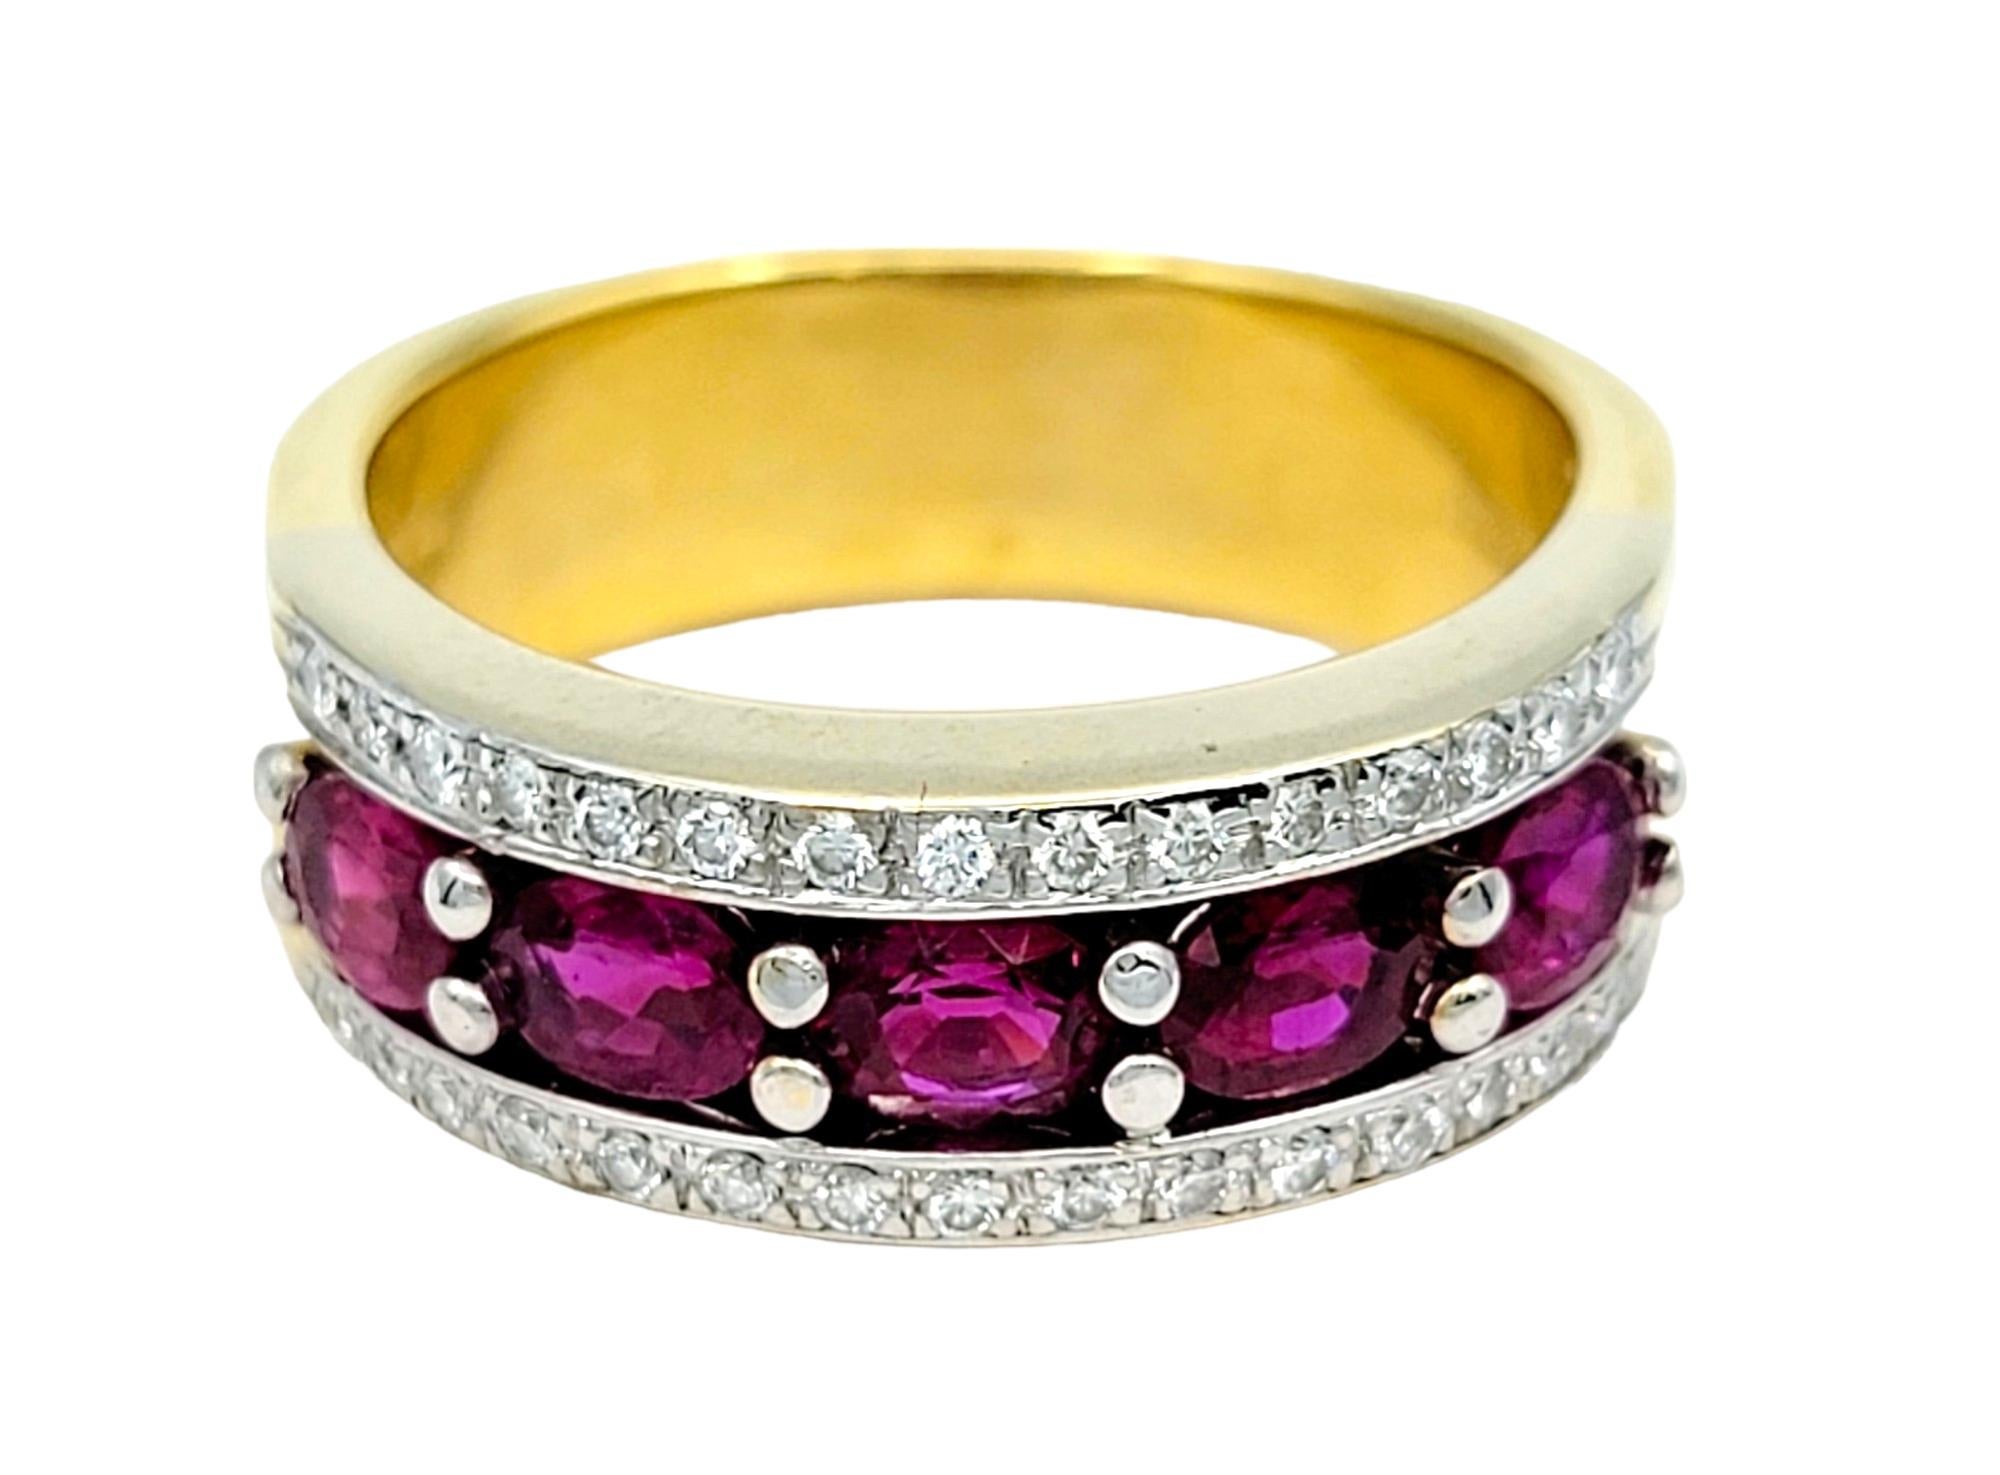 Oval Ruby and Pave Diamond Semi-Eternity Band Ring in 18 Karat Yellow Gold  In Good Condition For Sale In Scottsdale, AZ